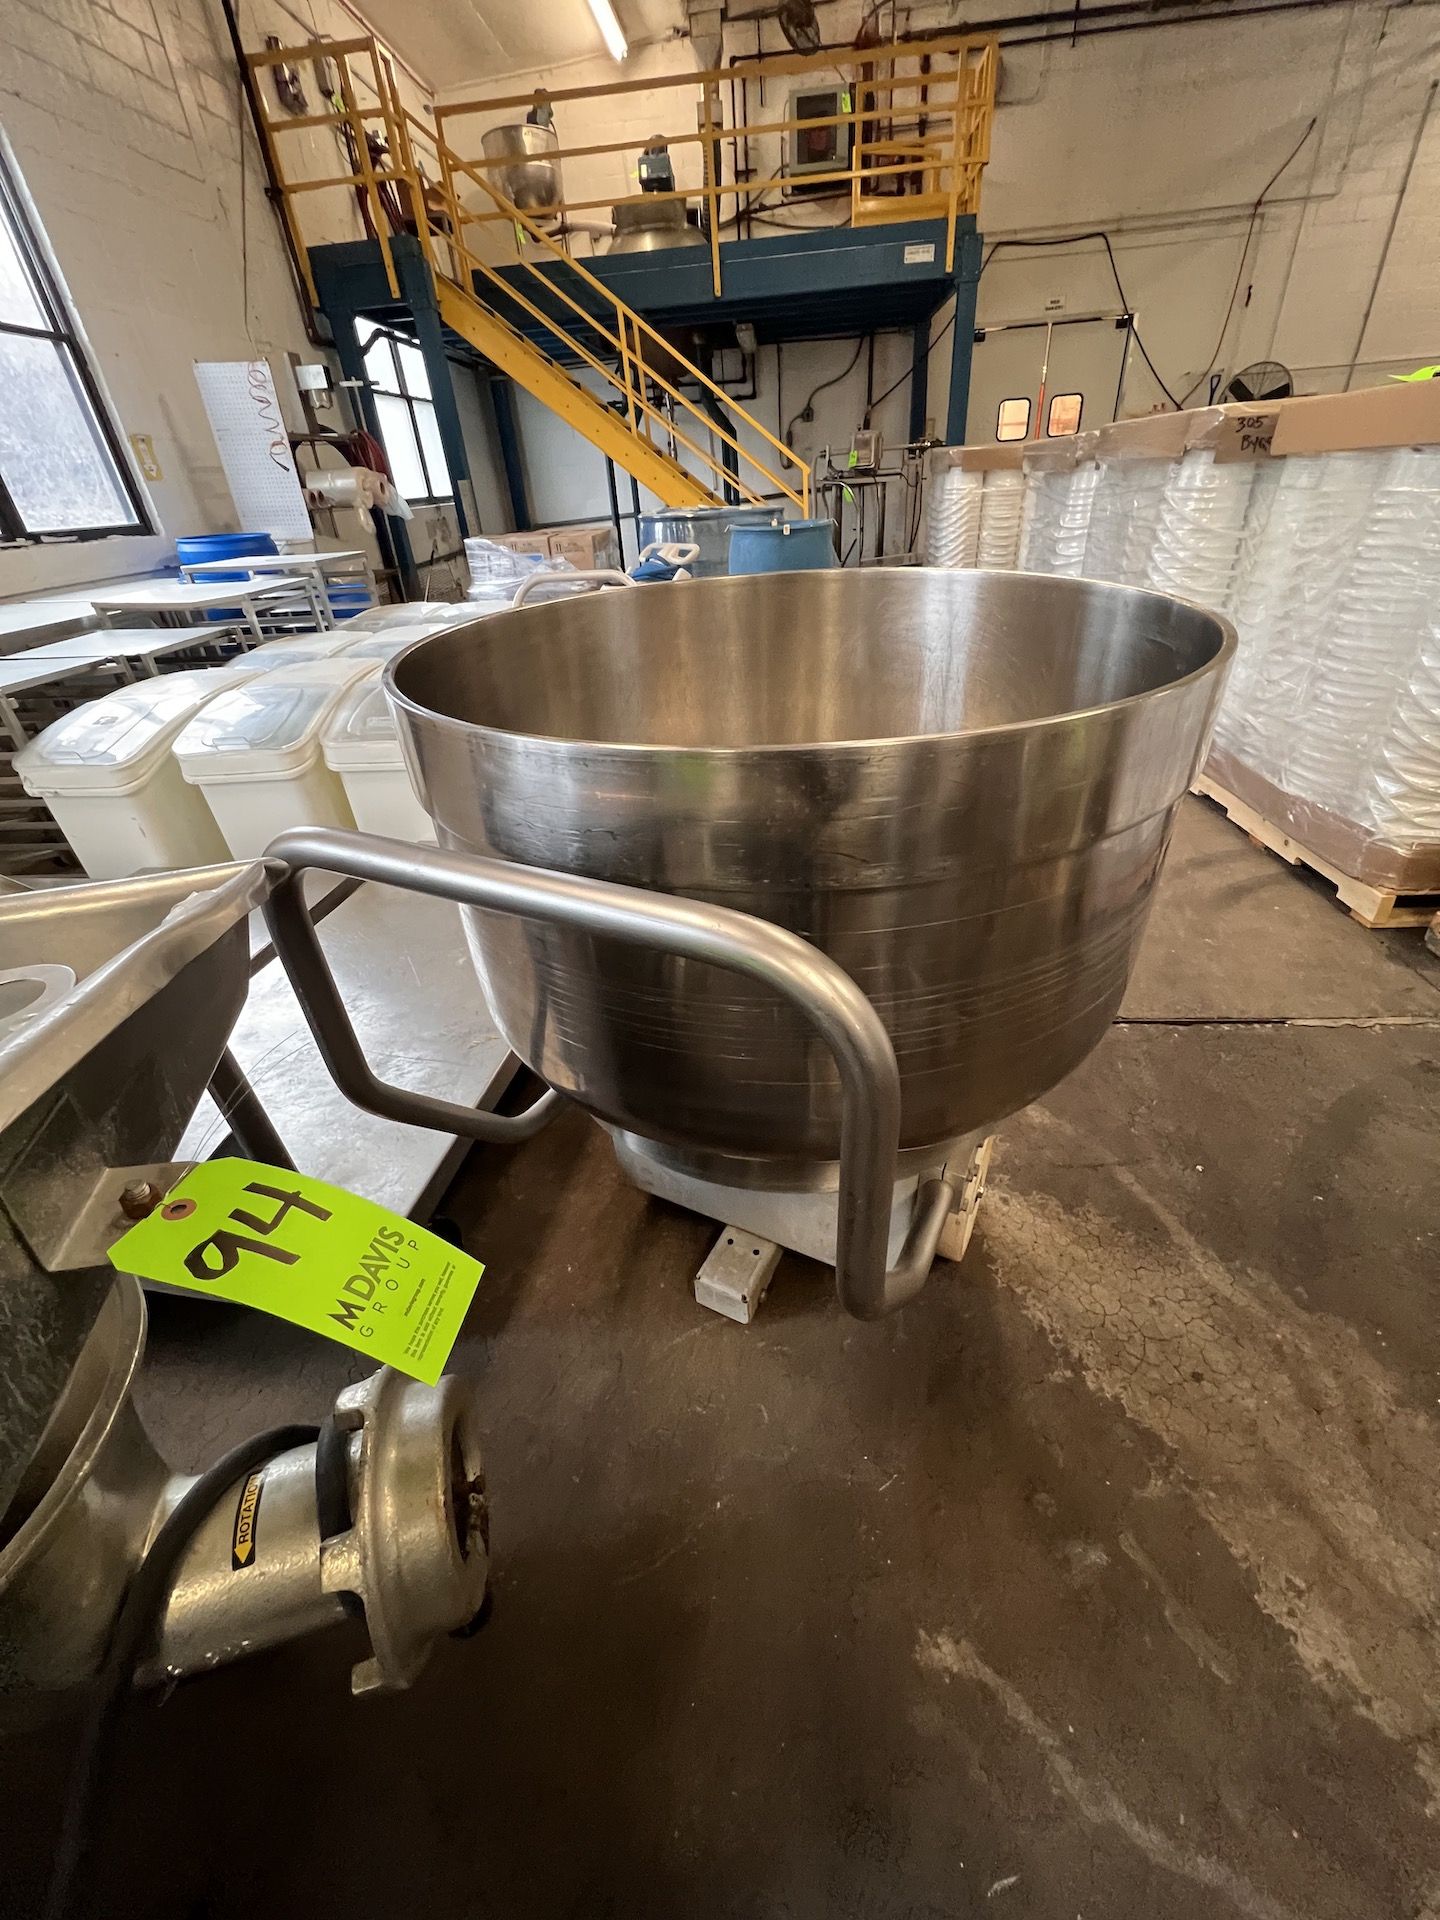 PORTABLE S/S MIXING BOWL FOR SPIRAL MIXERS, APPROX. 38 IN. W X 19 IN. D - Image 3 of 5